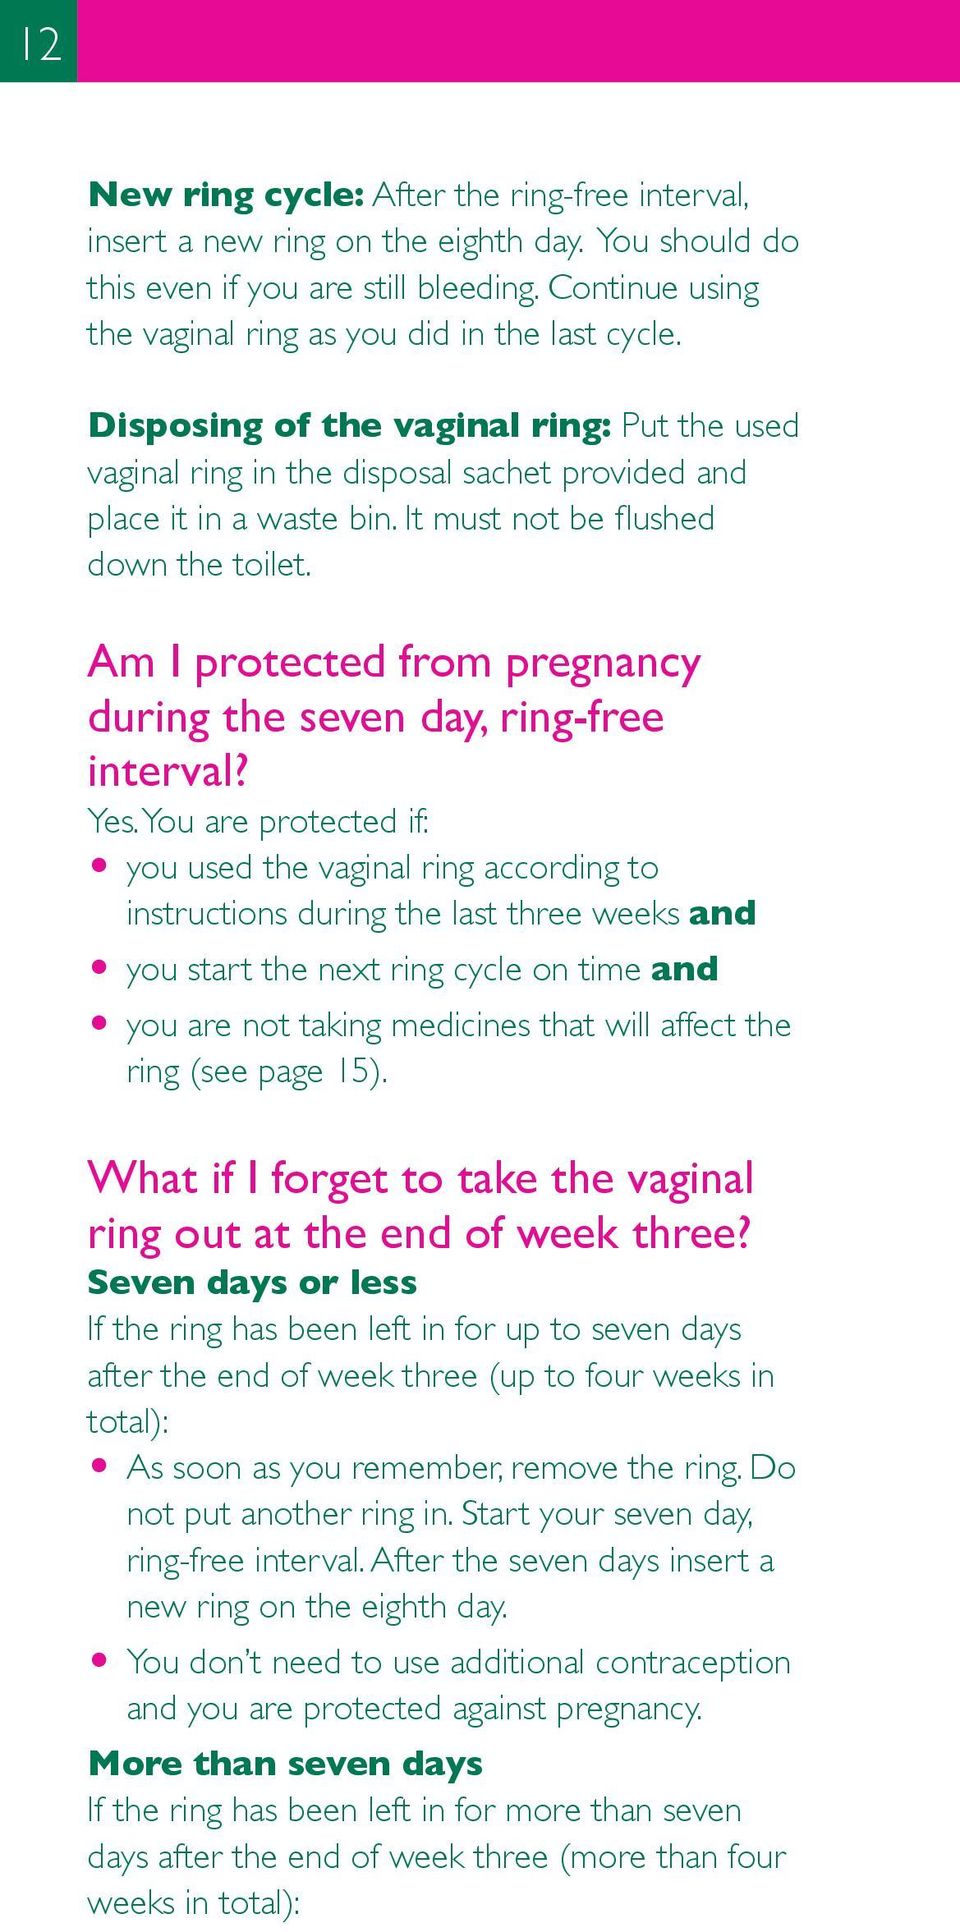 Am I protected from pregnancy during the seven day, ring-free interval? Yes.